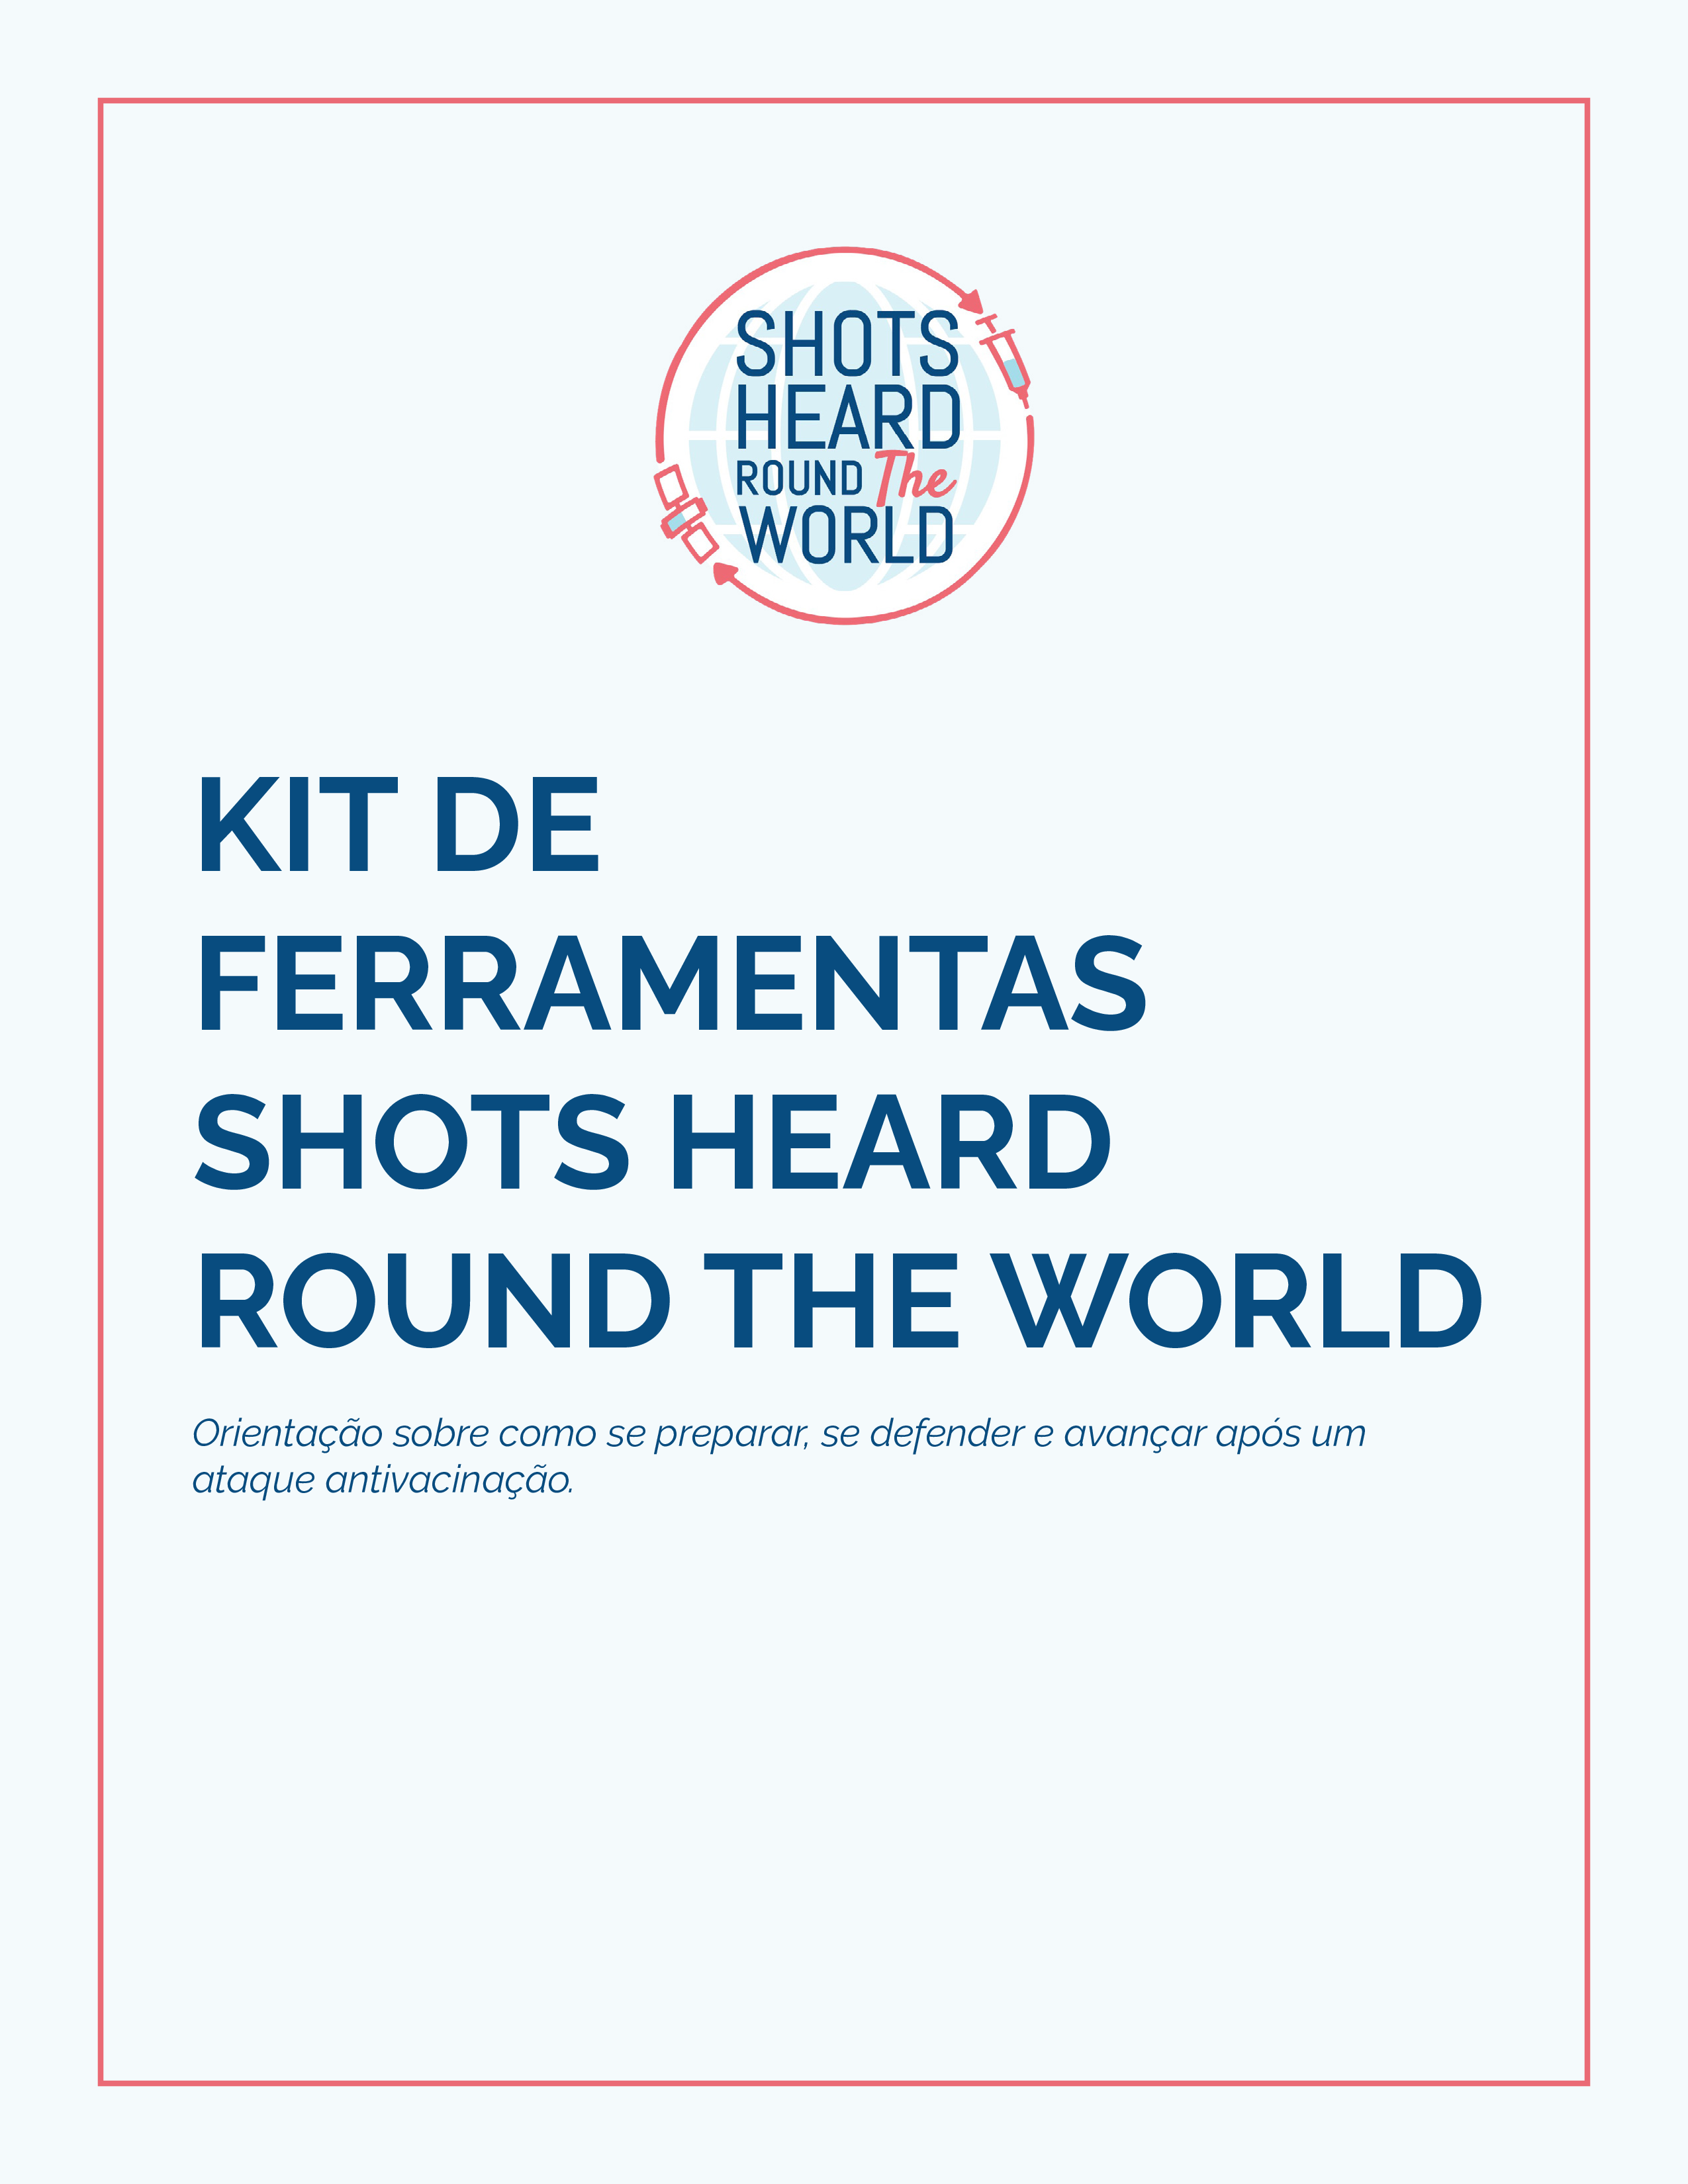 Cover page of Shots Heard Round the World Toolkit. States "Guidance on how to prepare for, defend against, and move forward after an anti-vaccination attack."